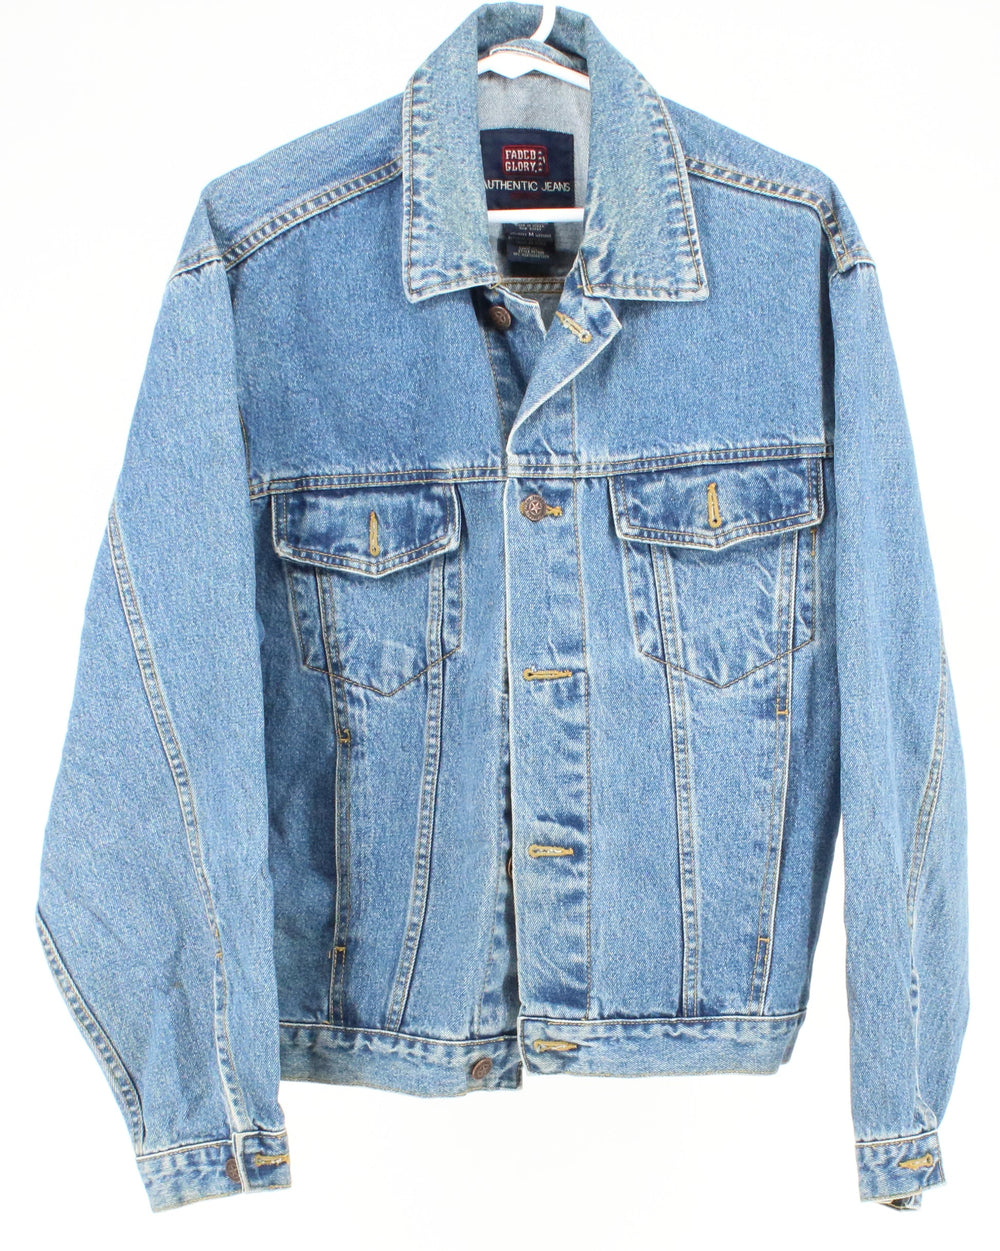 Faded Glory Authentic Jeans Blue Denim Jacket